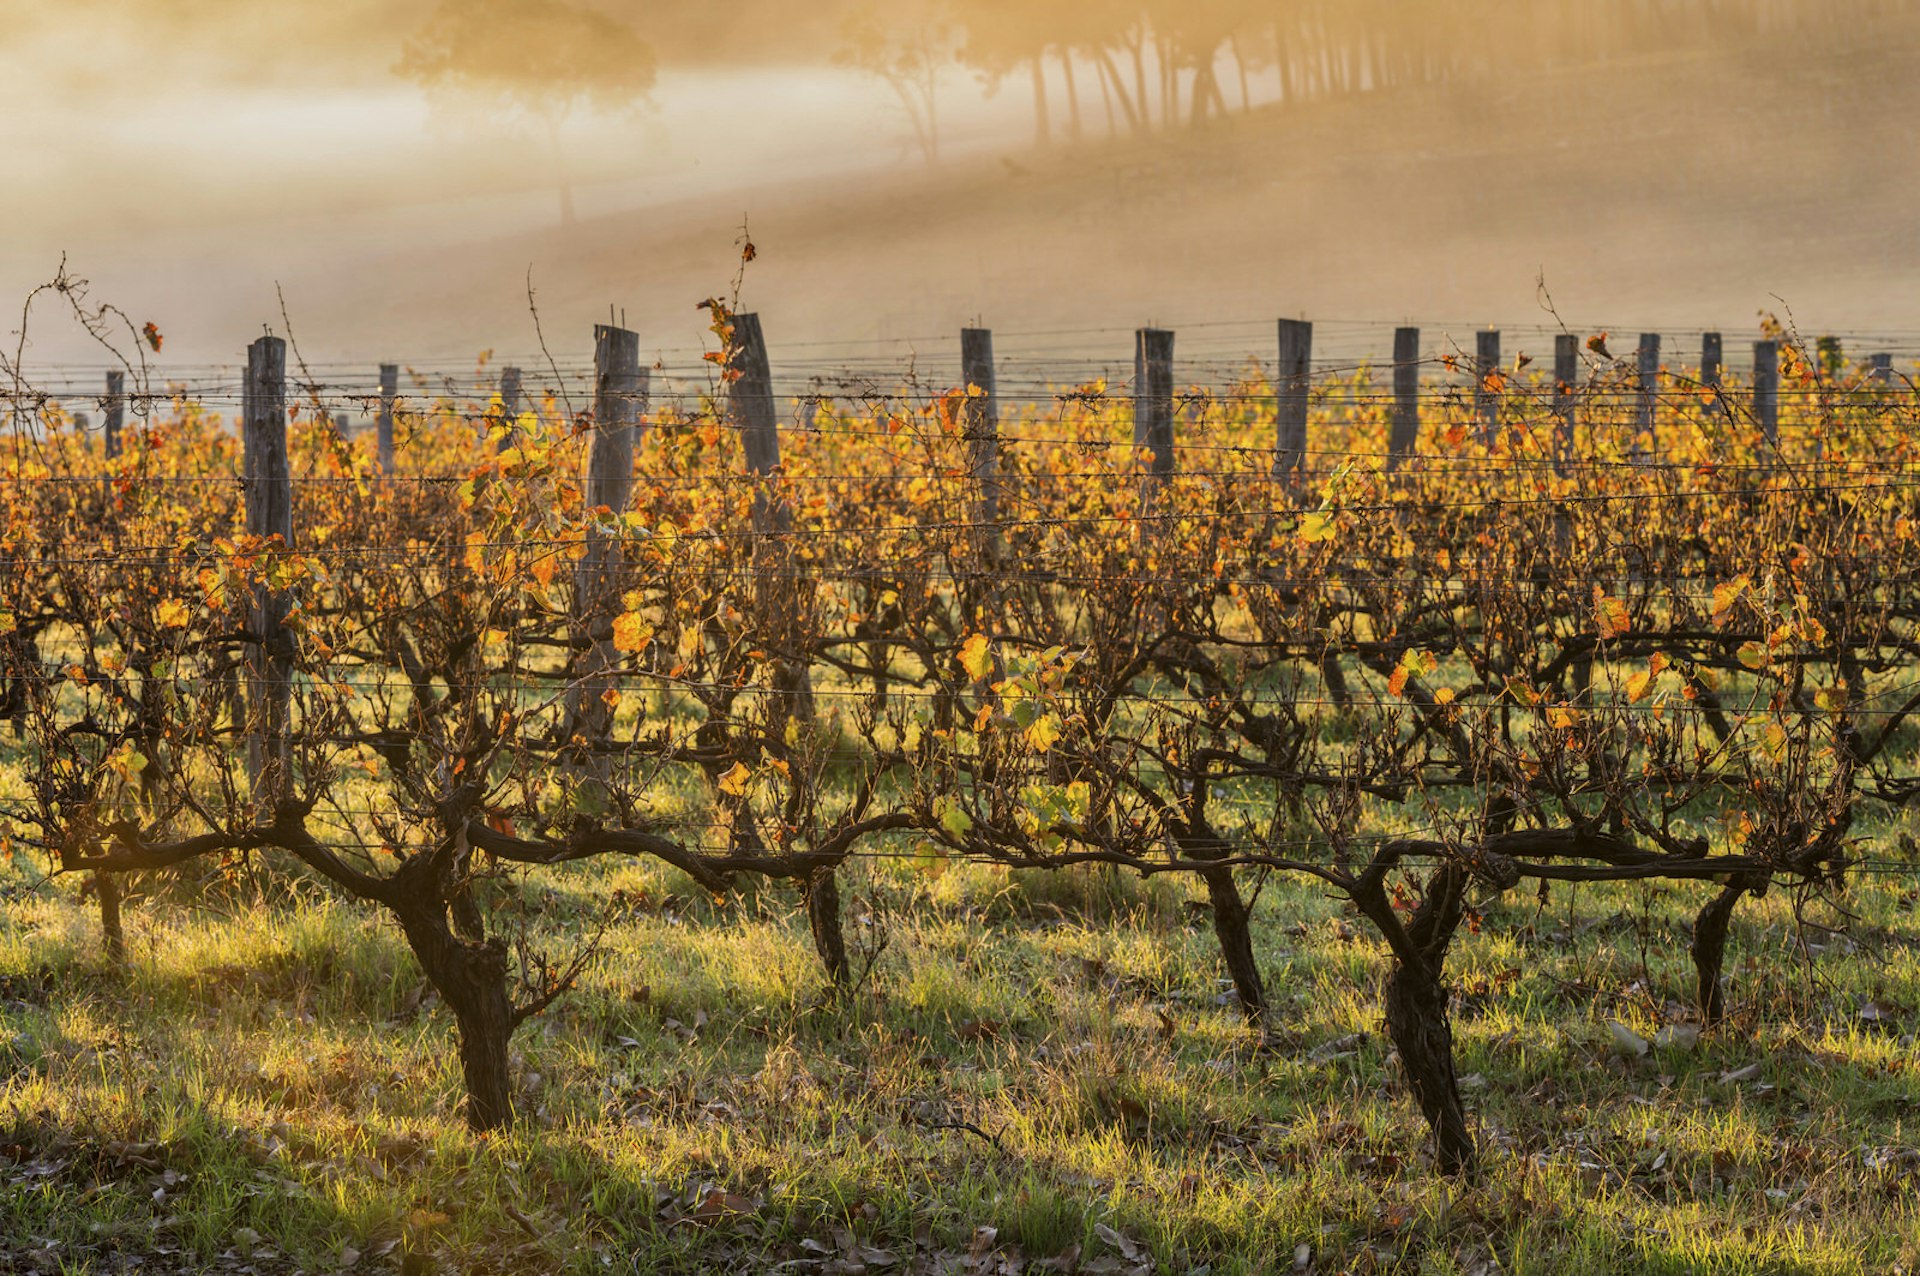 Margaret River - A misty dawn over one of Margaret River's many vineyards ©JanelleLugge/Getty Images